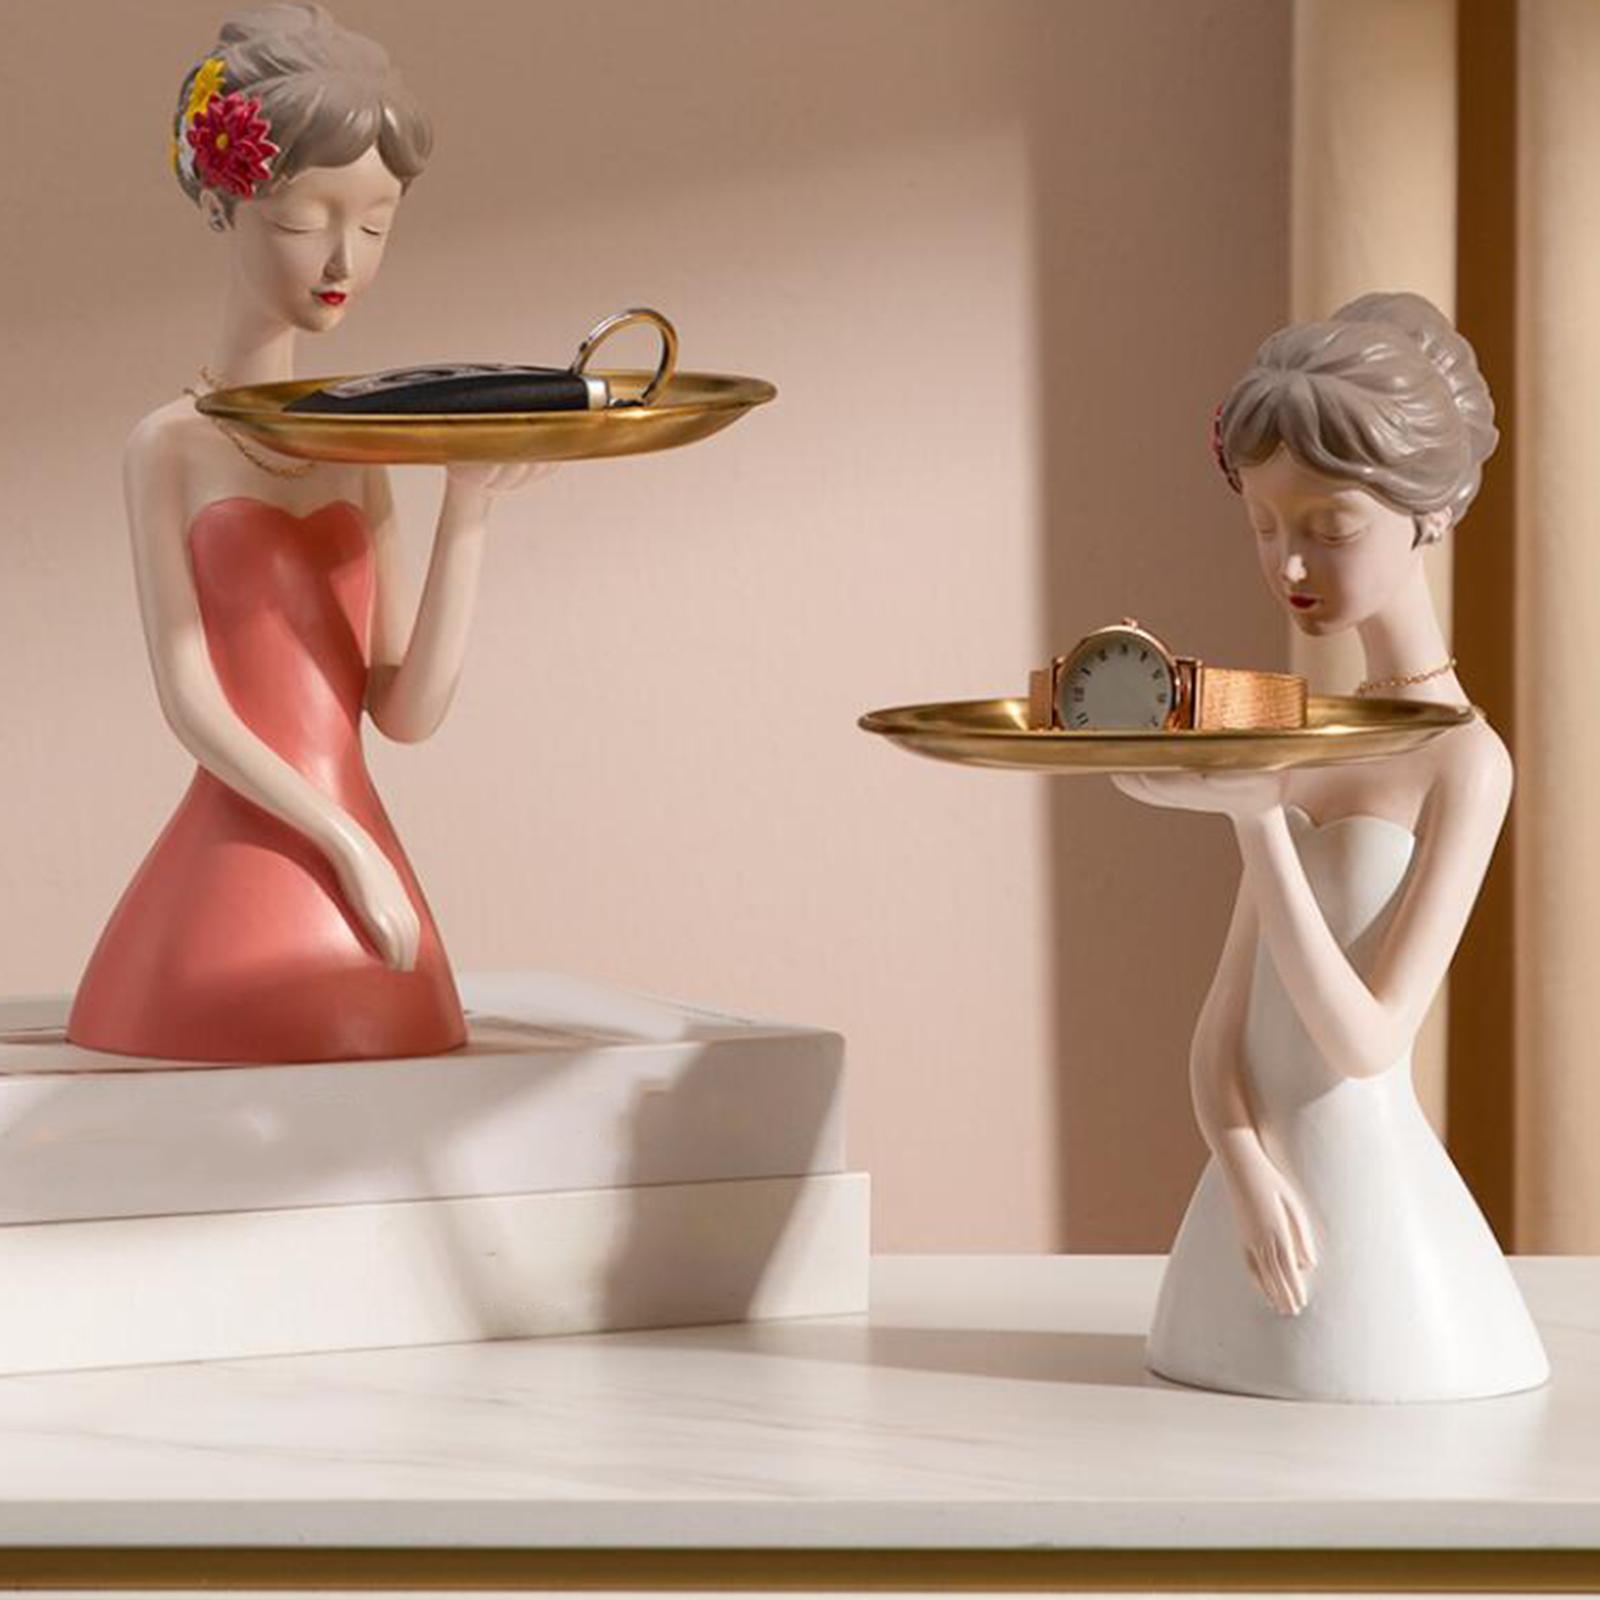 Resin Girl Statue Holding Storage Tray Table Desk Decor Sculpture